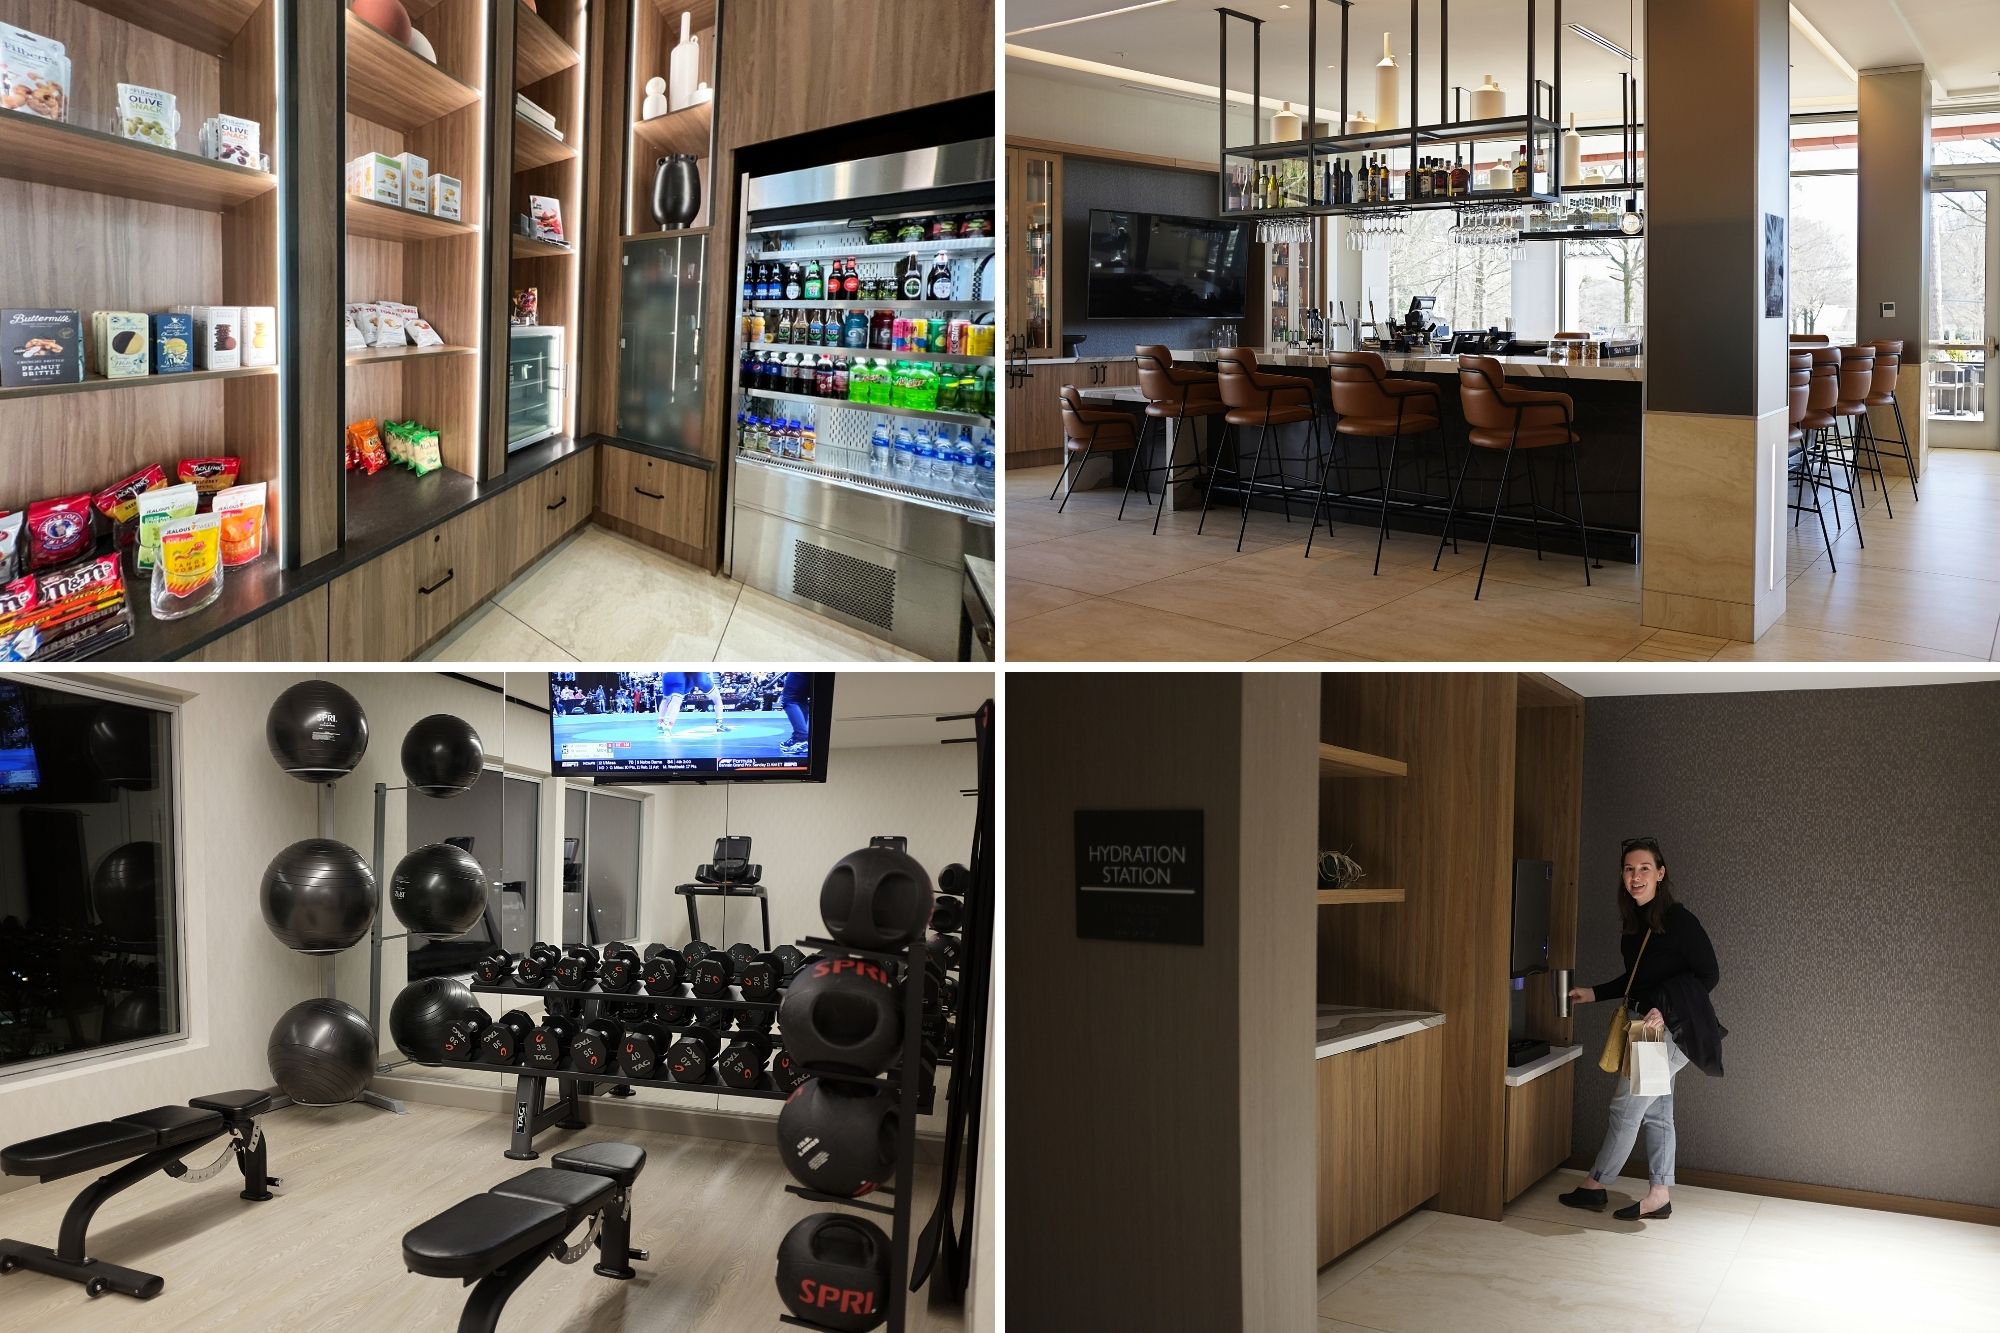 Collage: Hotel convenience store, lobby bar, fitness center, and hydration station